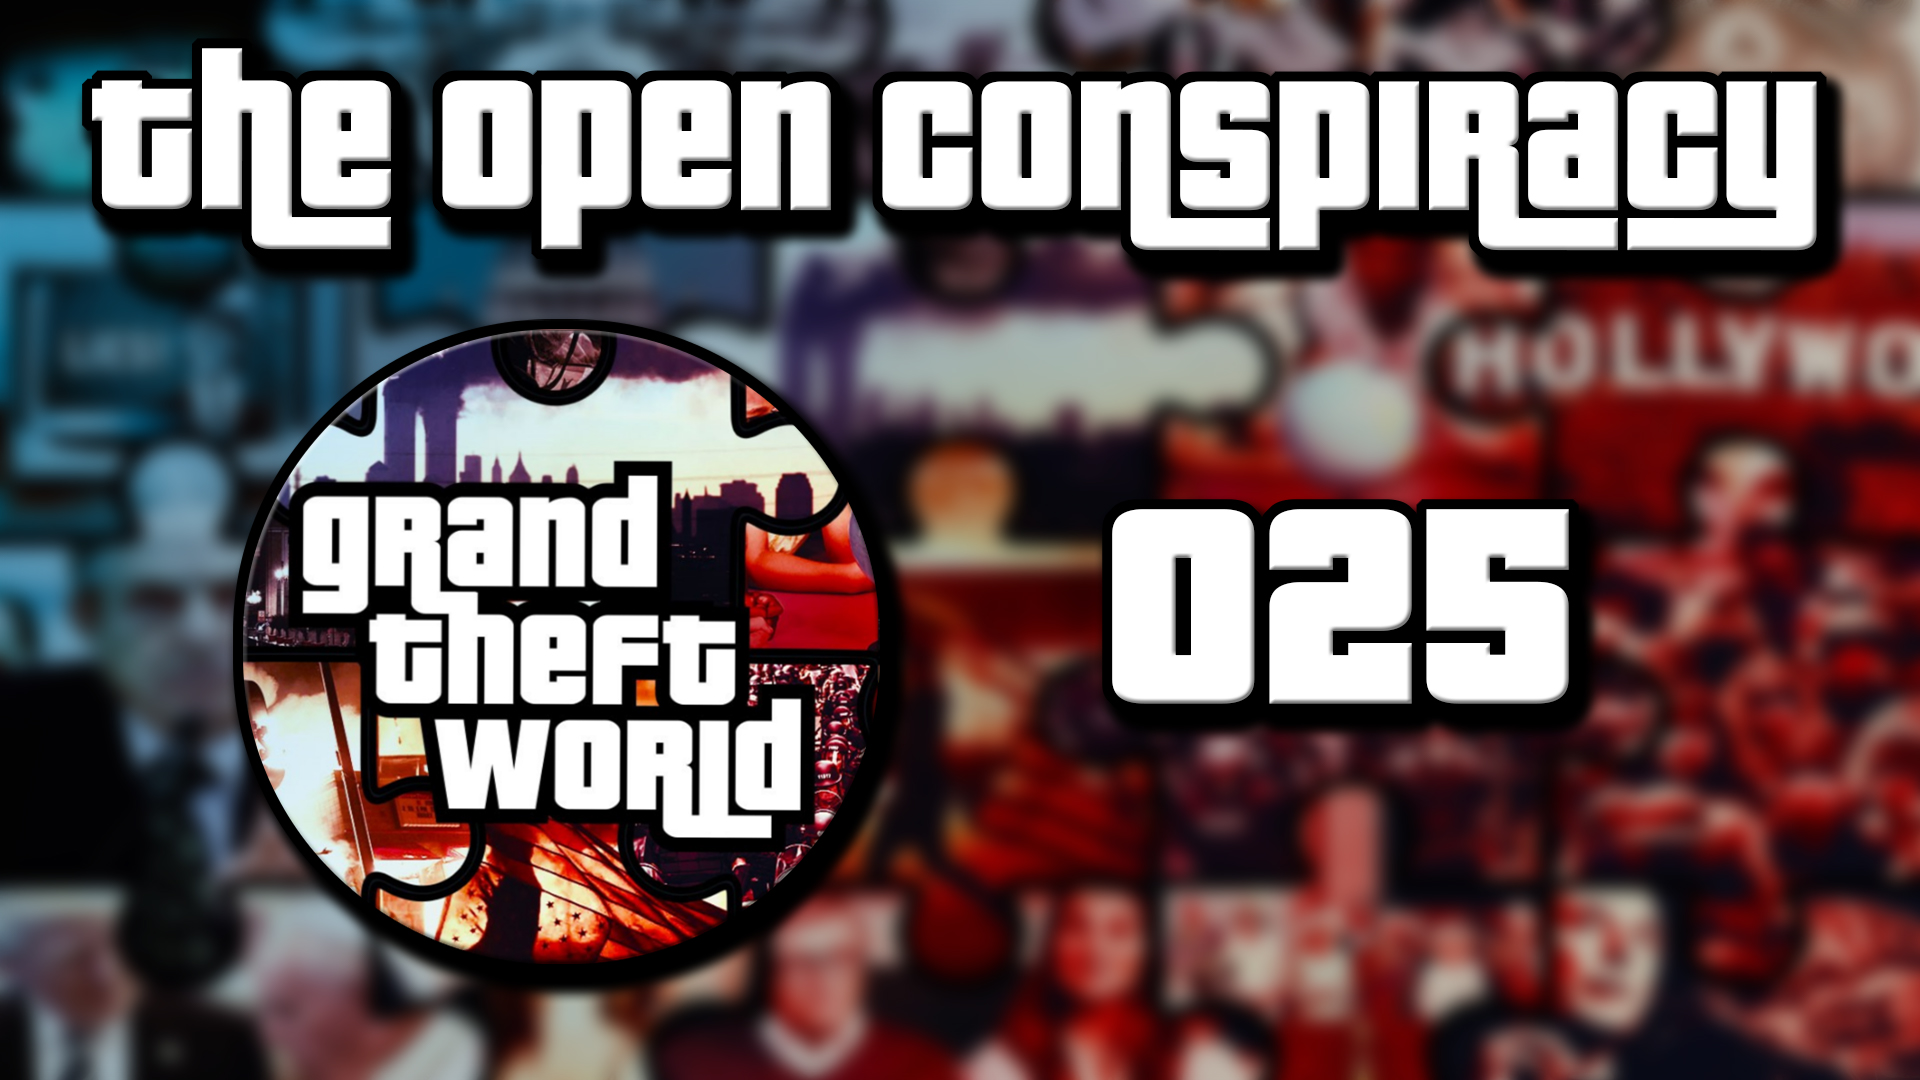 Grand Theft World Podcast 025 | The Open Conspiracy